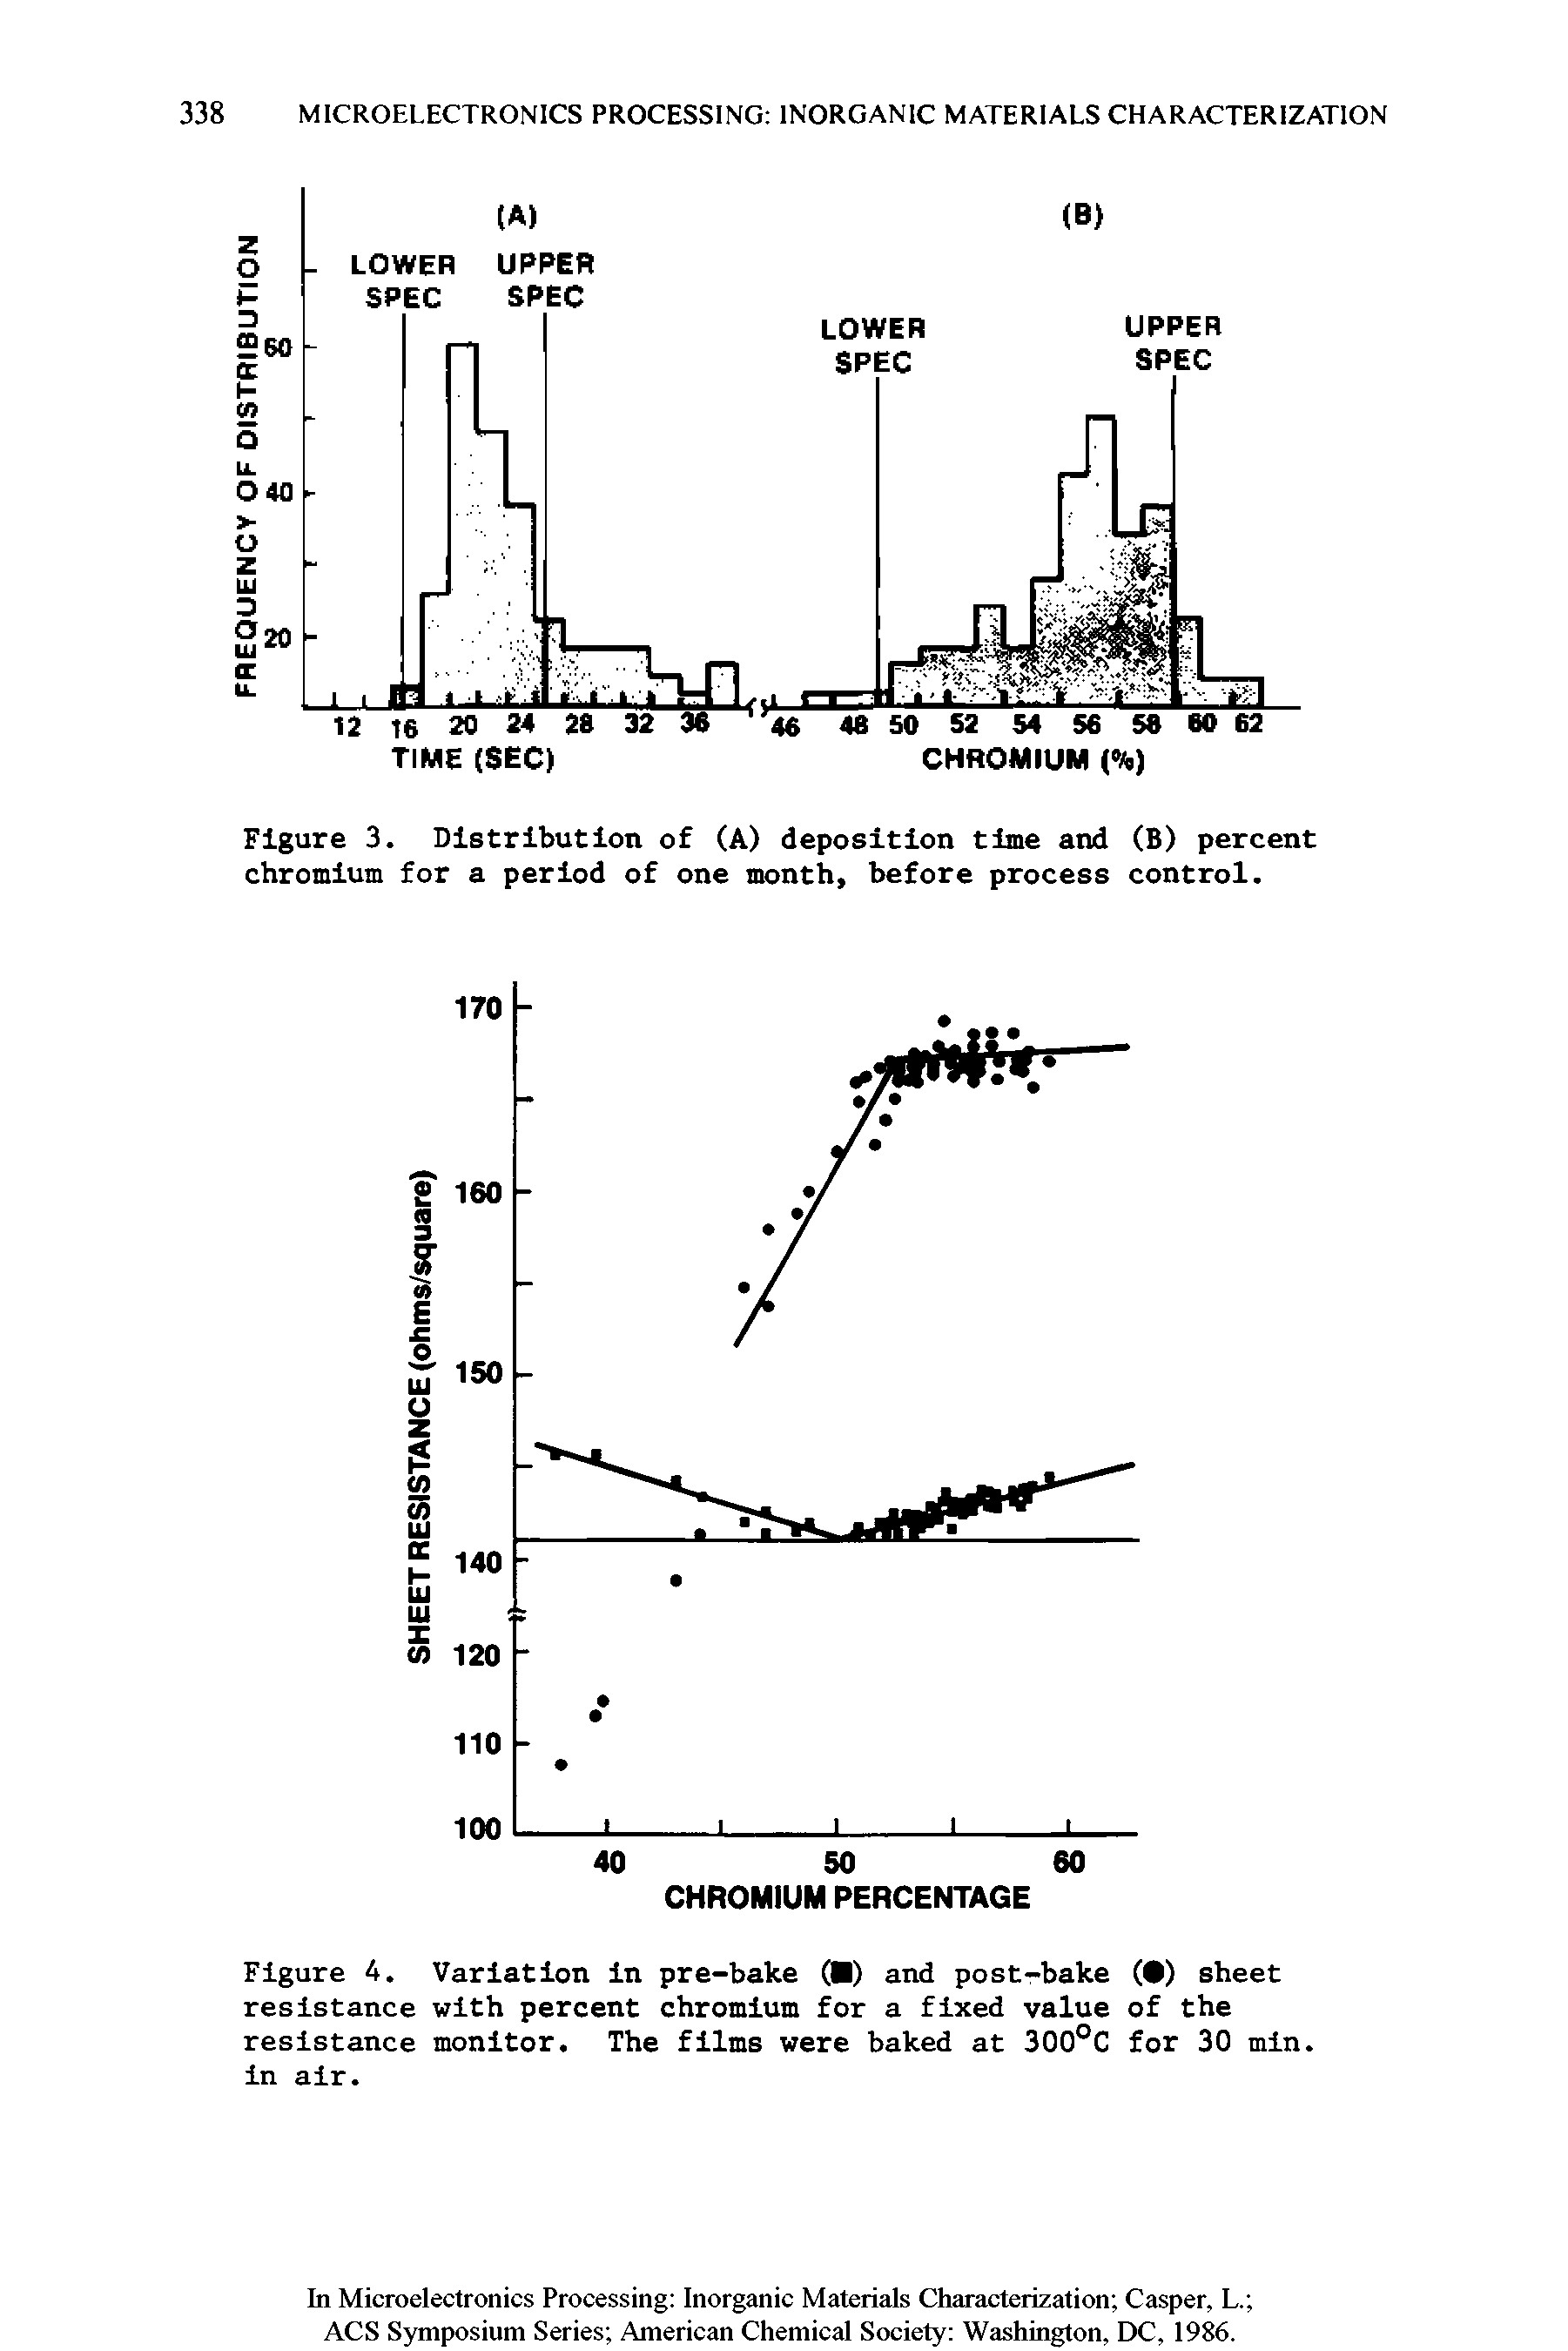 Figure 4. Variation in pre-bake ( ) and post-bake ( ) sheet resistance with percent chromium for a fixed value of the resistance monitor. The films were baked at 300°C for 30 min. in air.